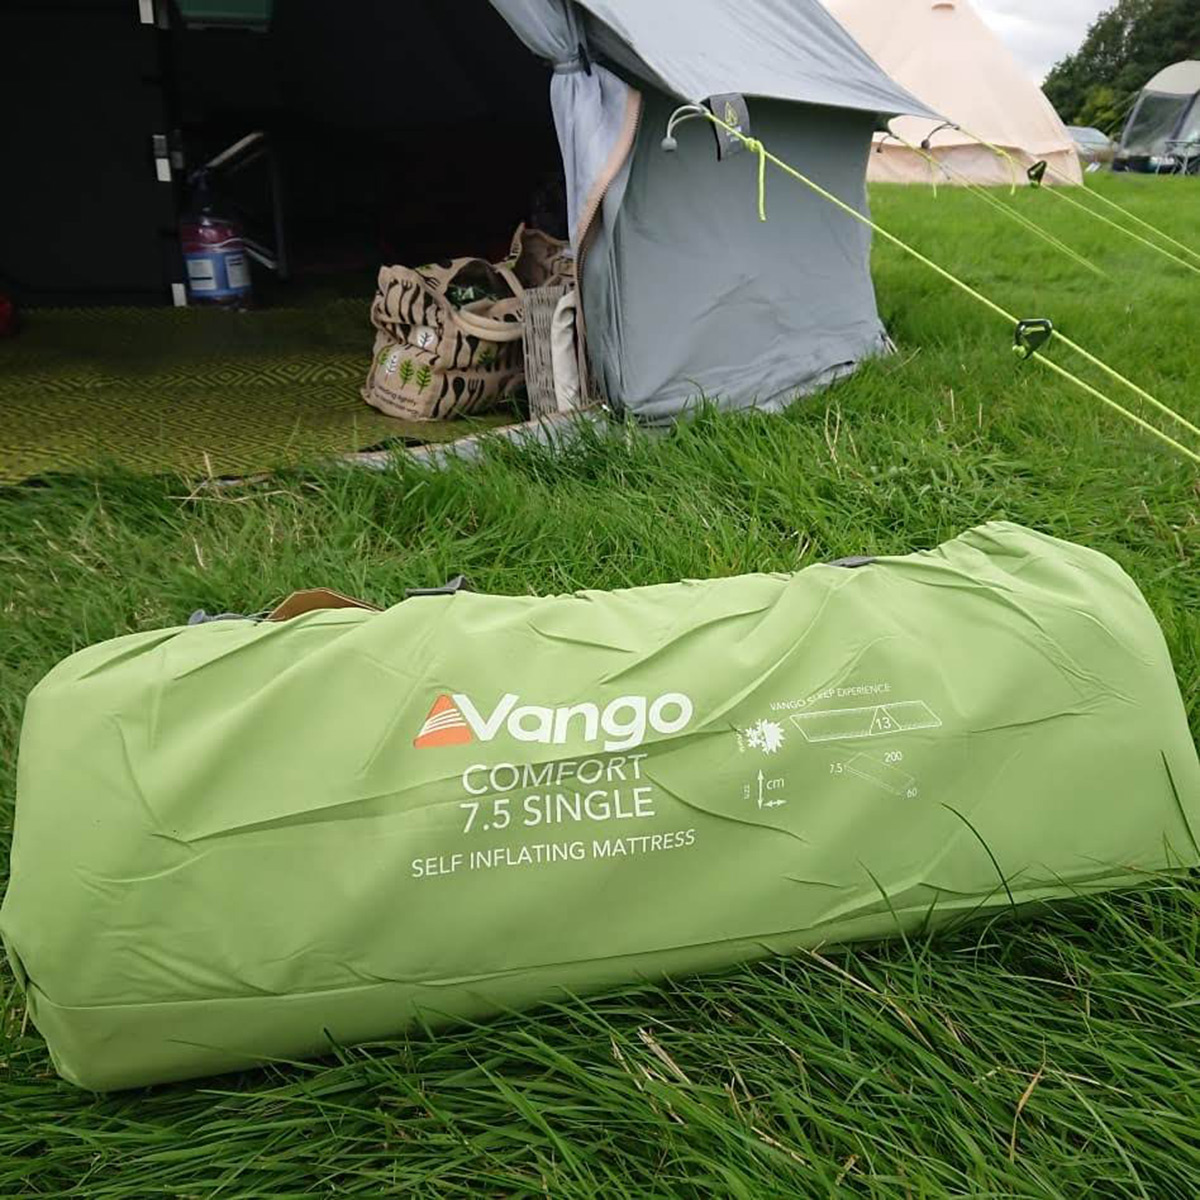 A great quality and great value camping mattress that we thoroughly recommend.